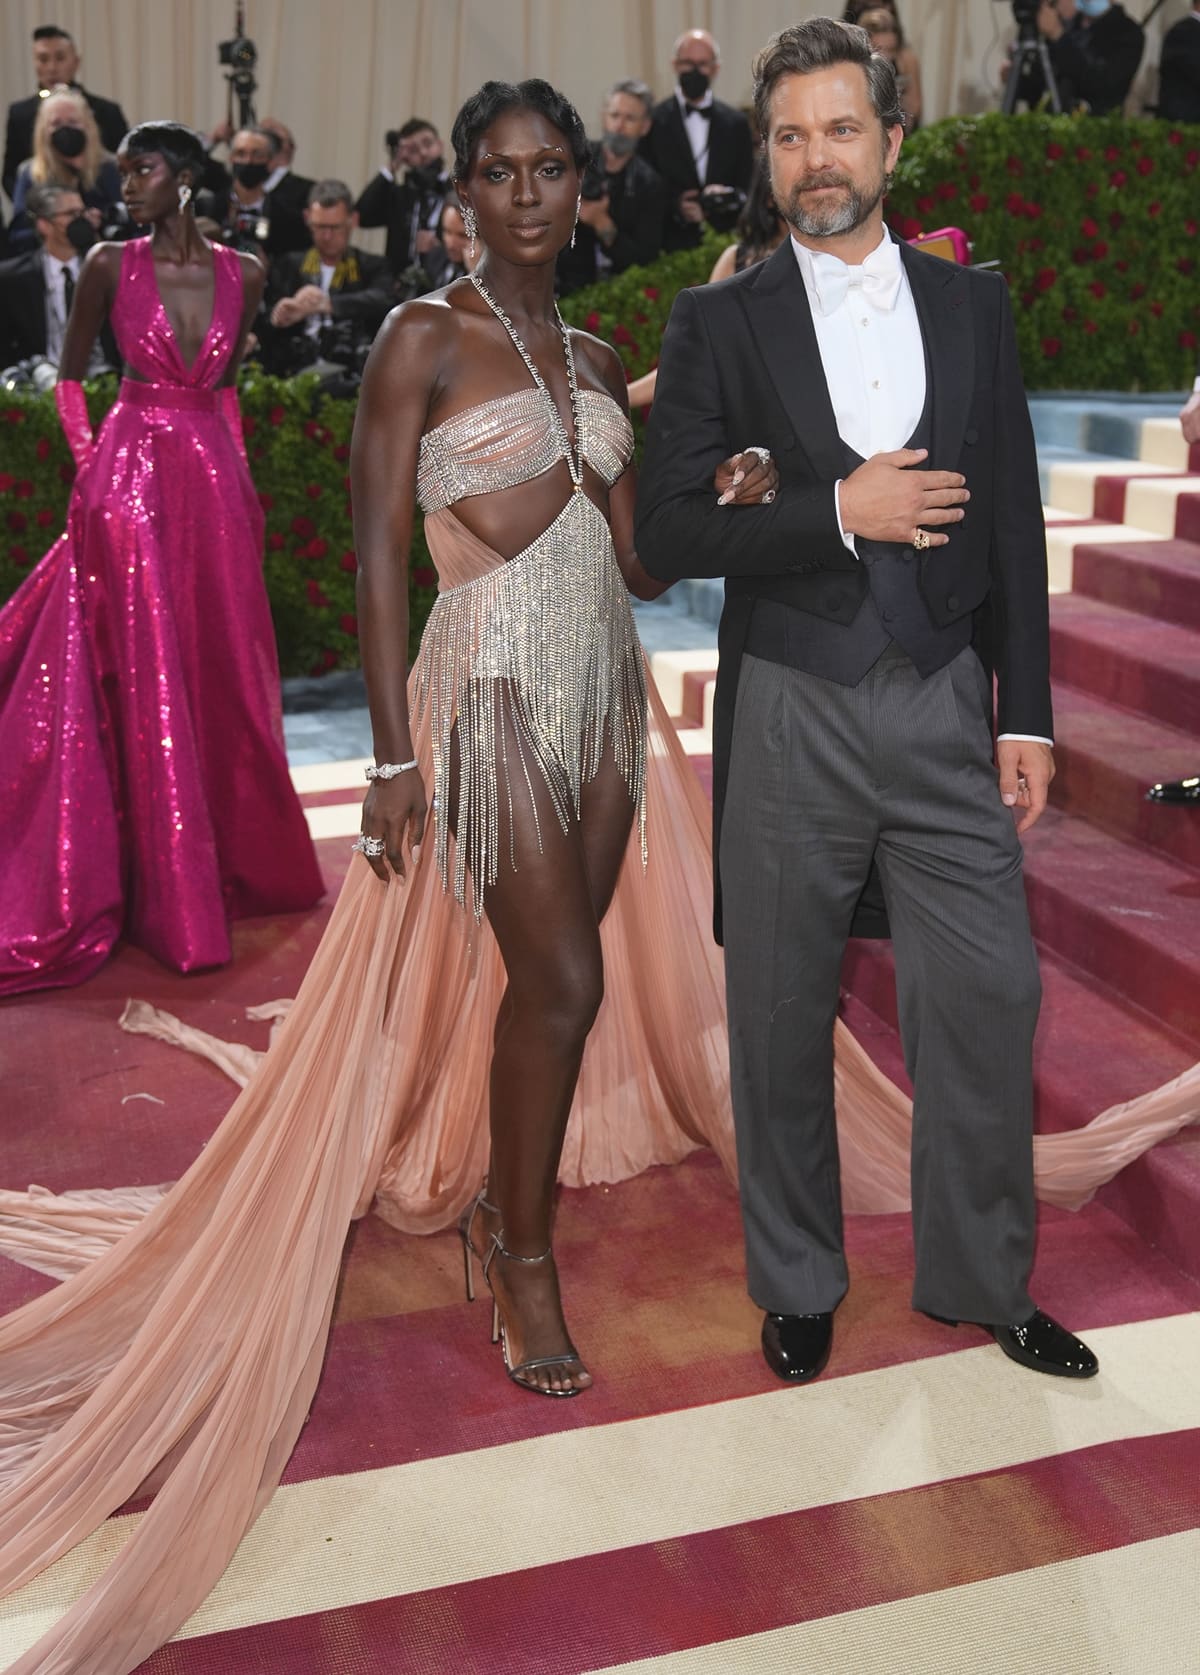 Both wearing Gucci, Jodie Turner-Smith and her husband Joshua Jackson attended the 2022 Met Gala Celebrating "In America: An Anthology of Fashion"